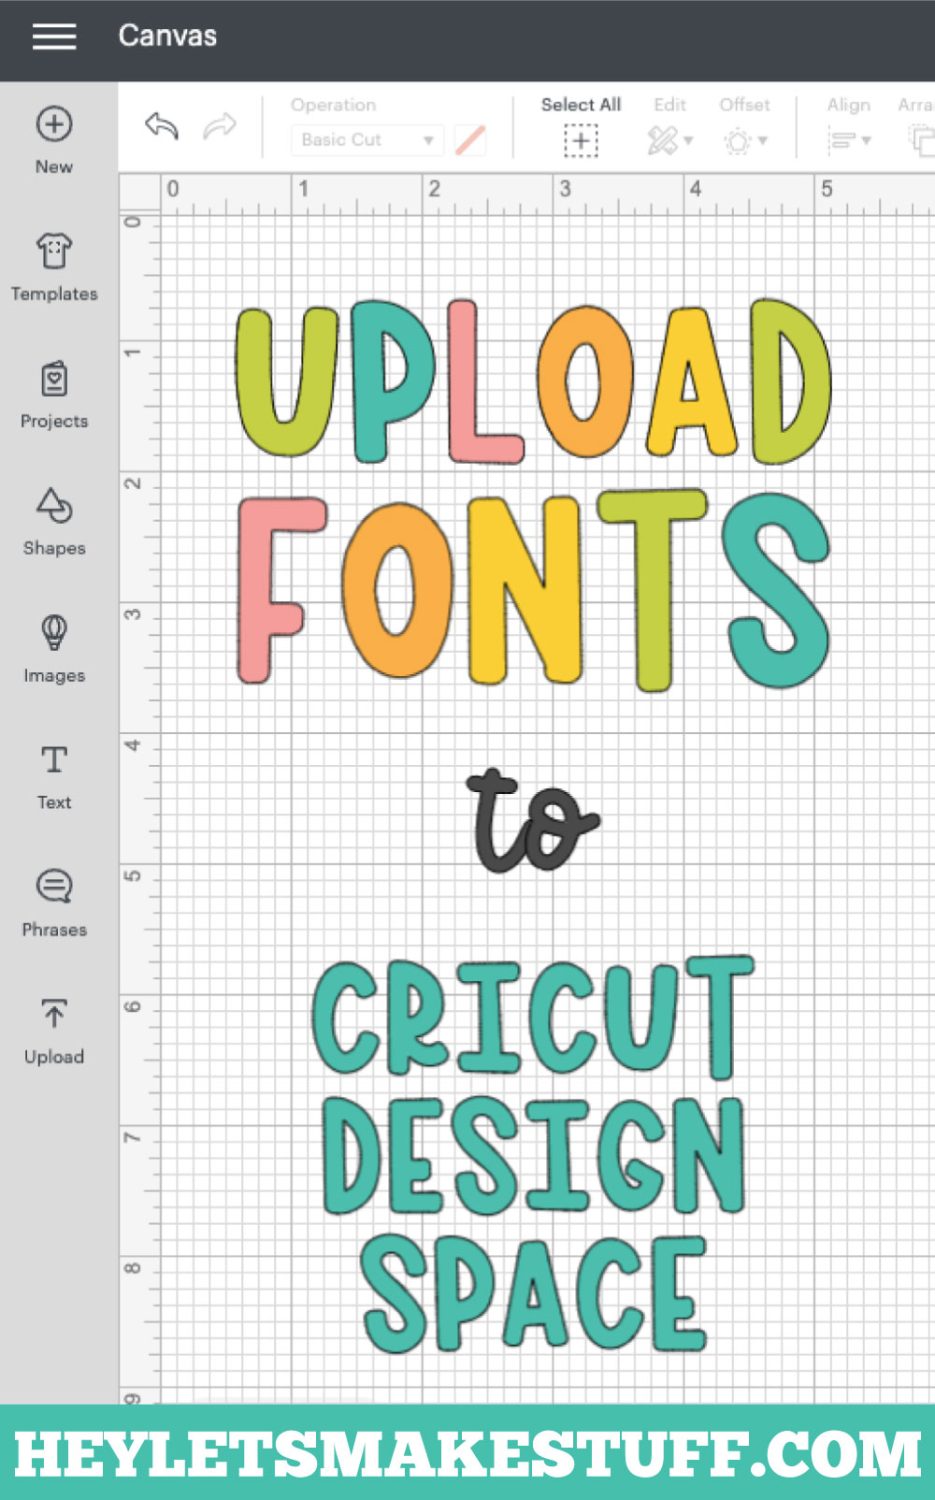 Want to truly customize all your Cricut crafts and projects? Learn how to upload fonts to Cricut Design Space! It's easy and gives you a ton of flexibility when creating your Cricut designs.